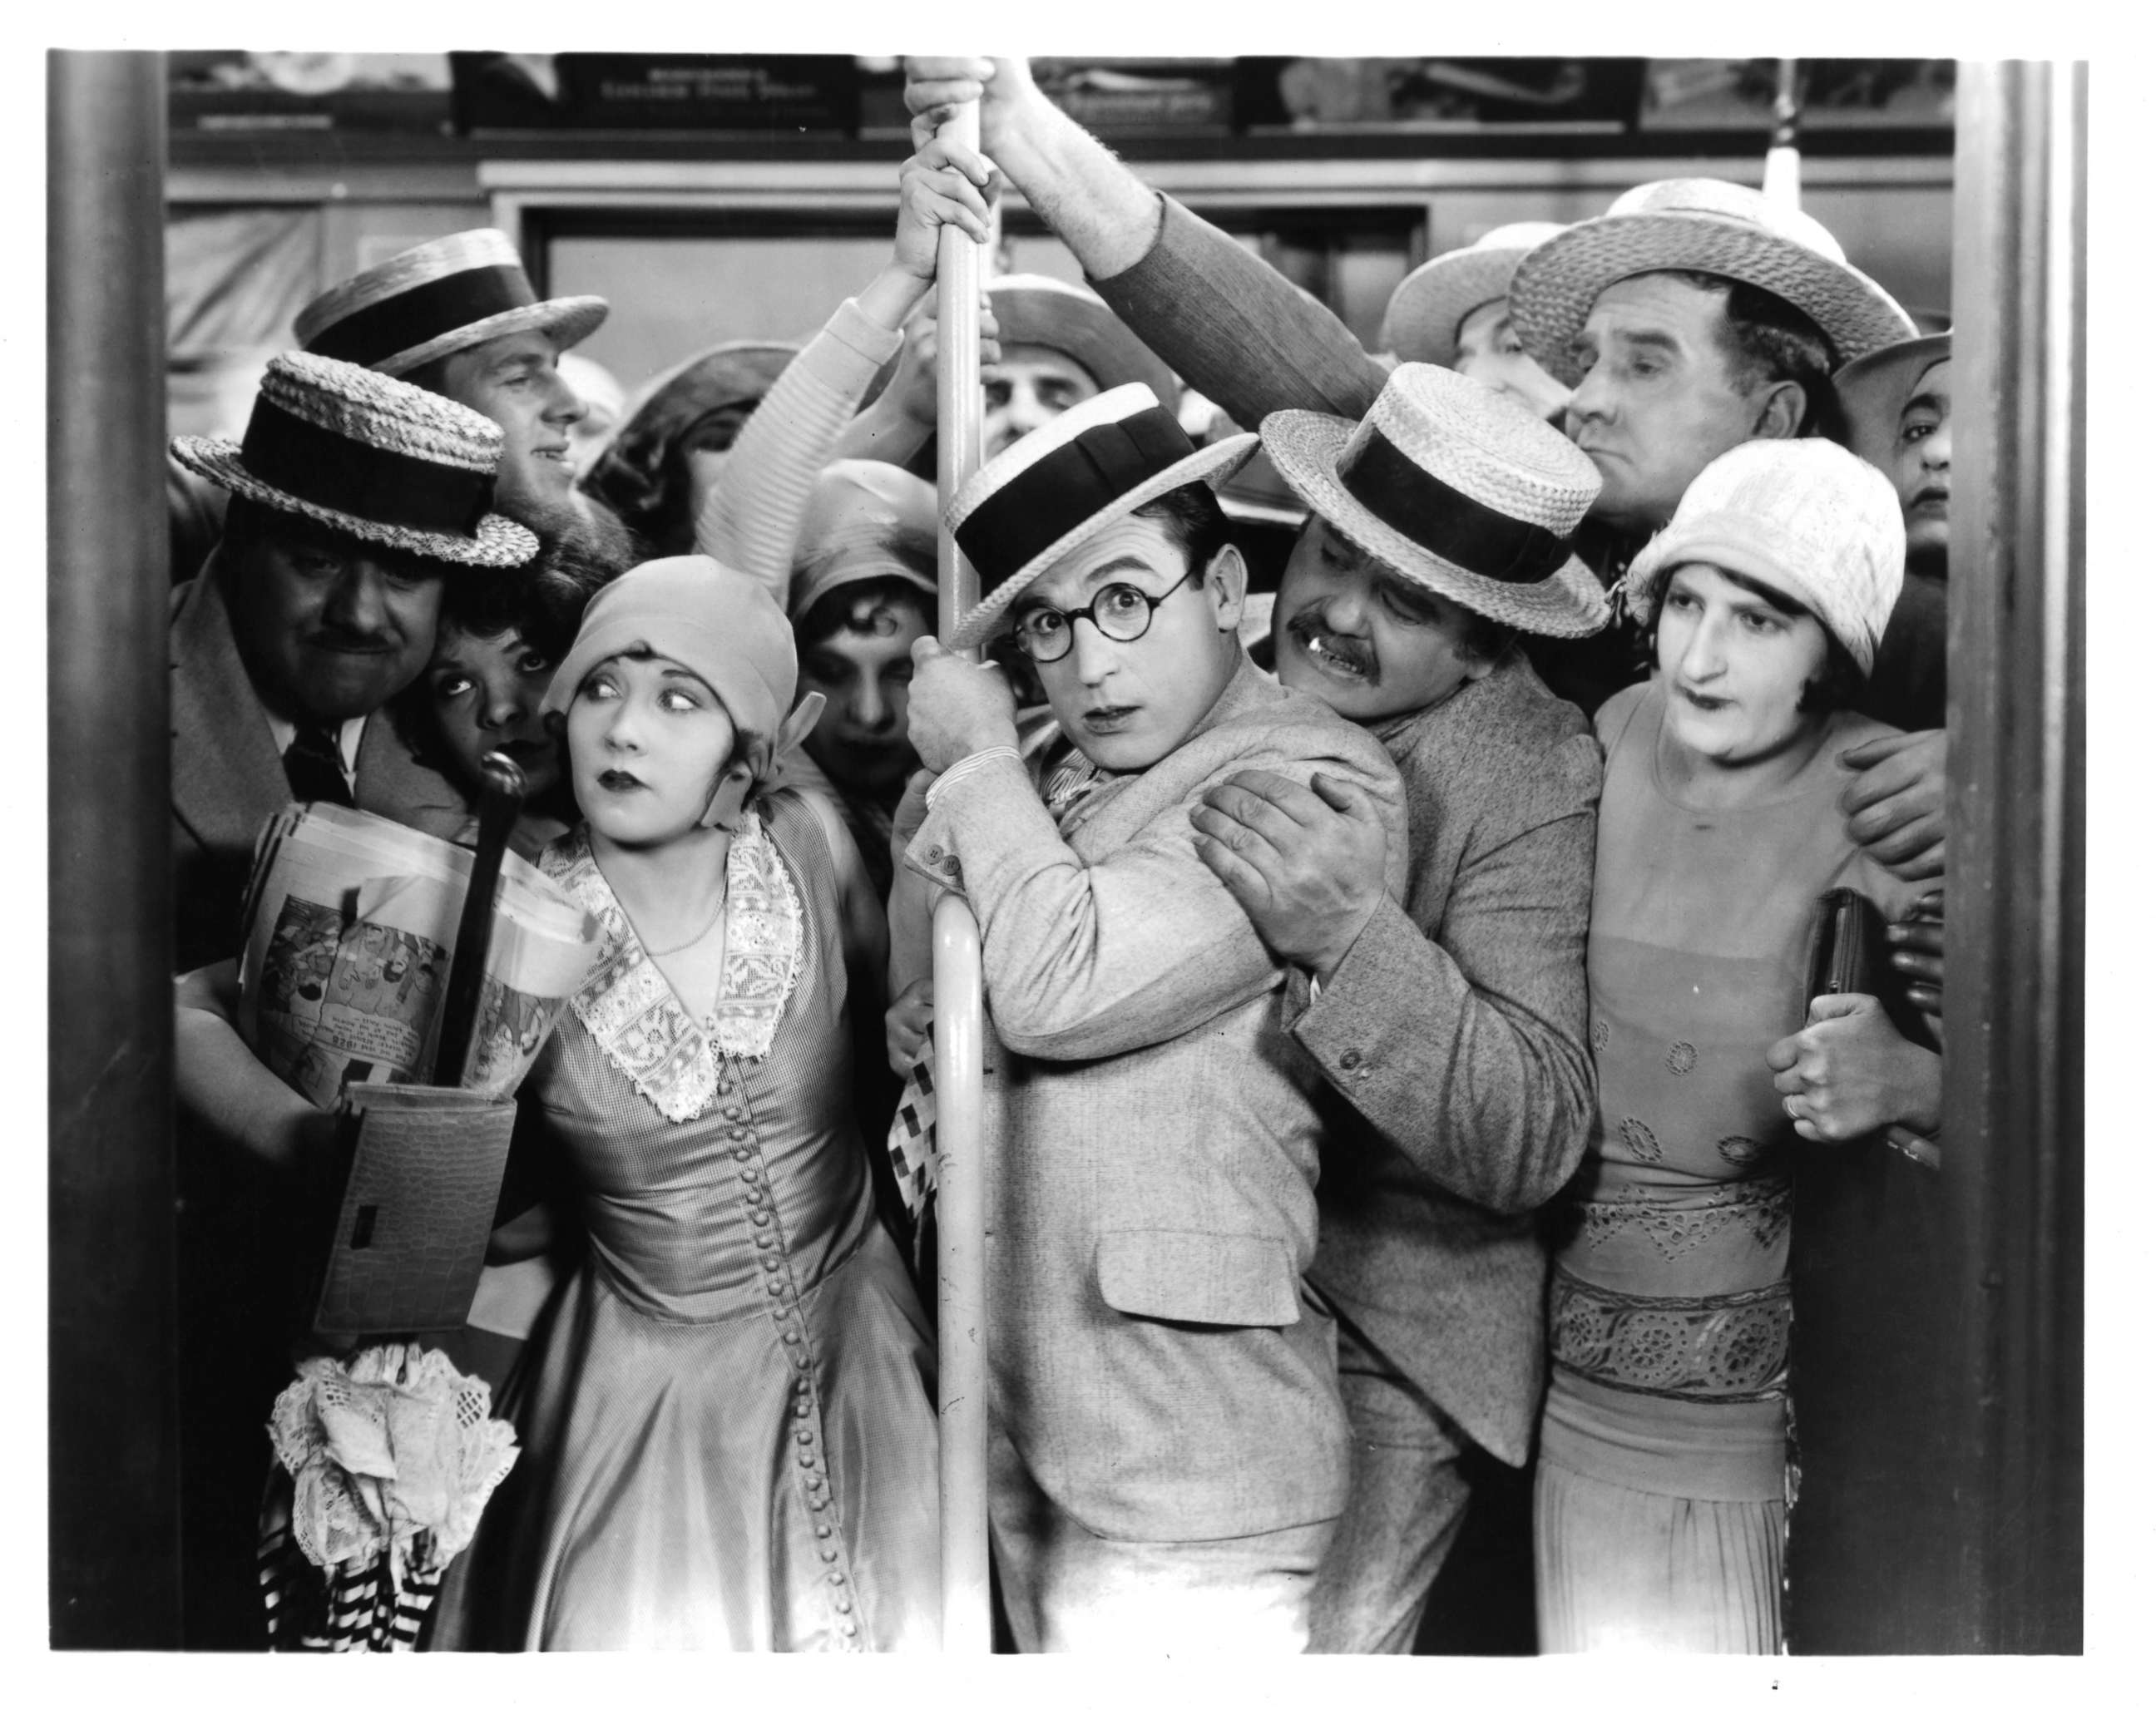 PHOTO: Harold Lloyd is packed in a crowded train in a scene from the film "Girl Shy," 1924.